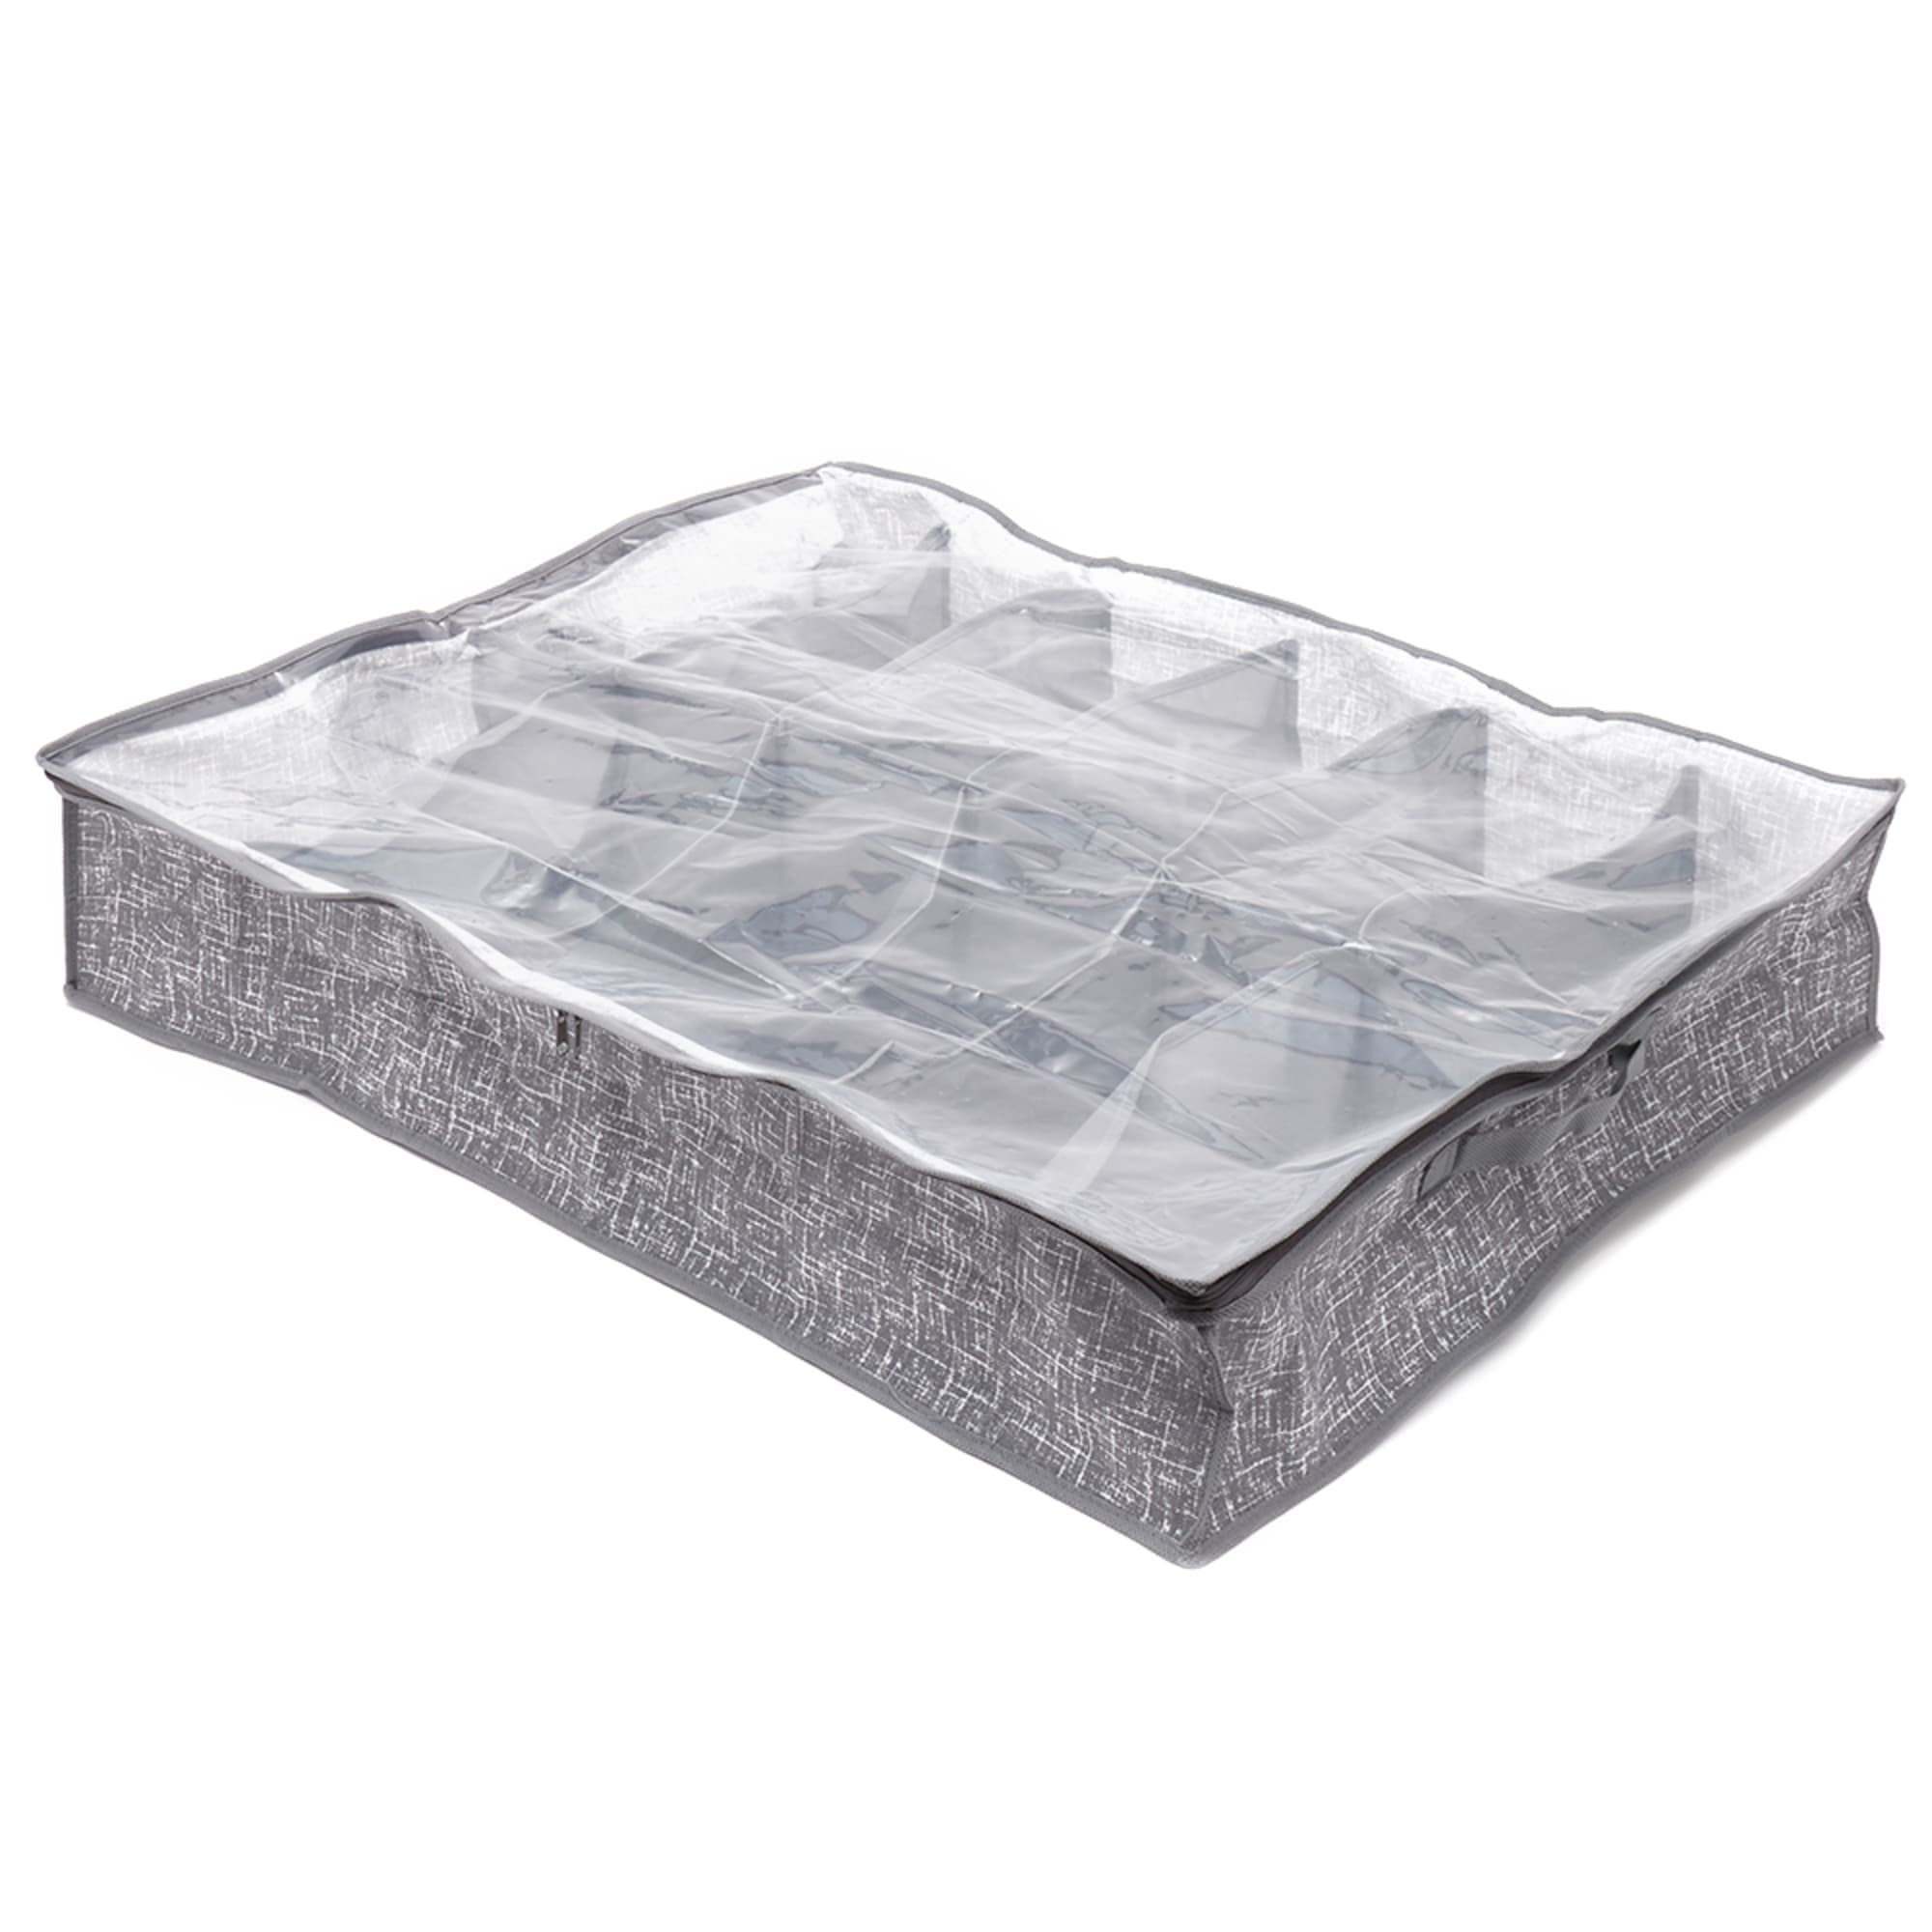 Home Basics Graph Line Non-Woven 12 Pair Under the Bed Shoe Organizer with Clear Top, Grey $5.00 EACH, CASE PACK OF 12